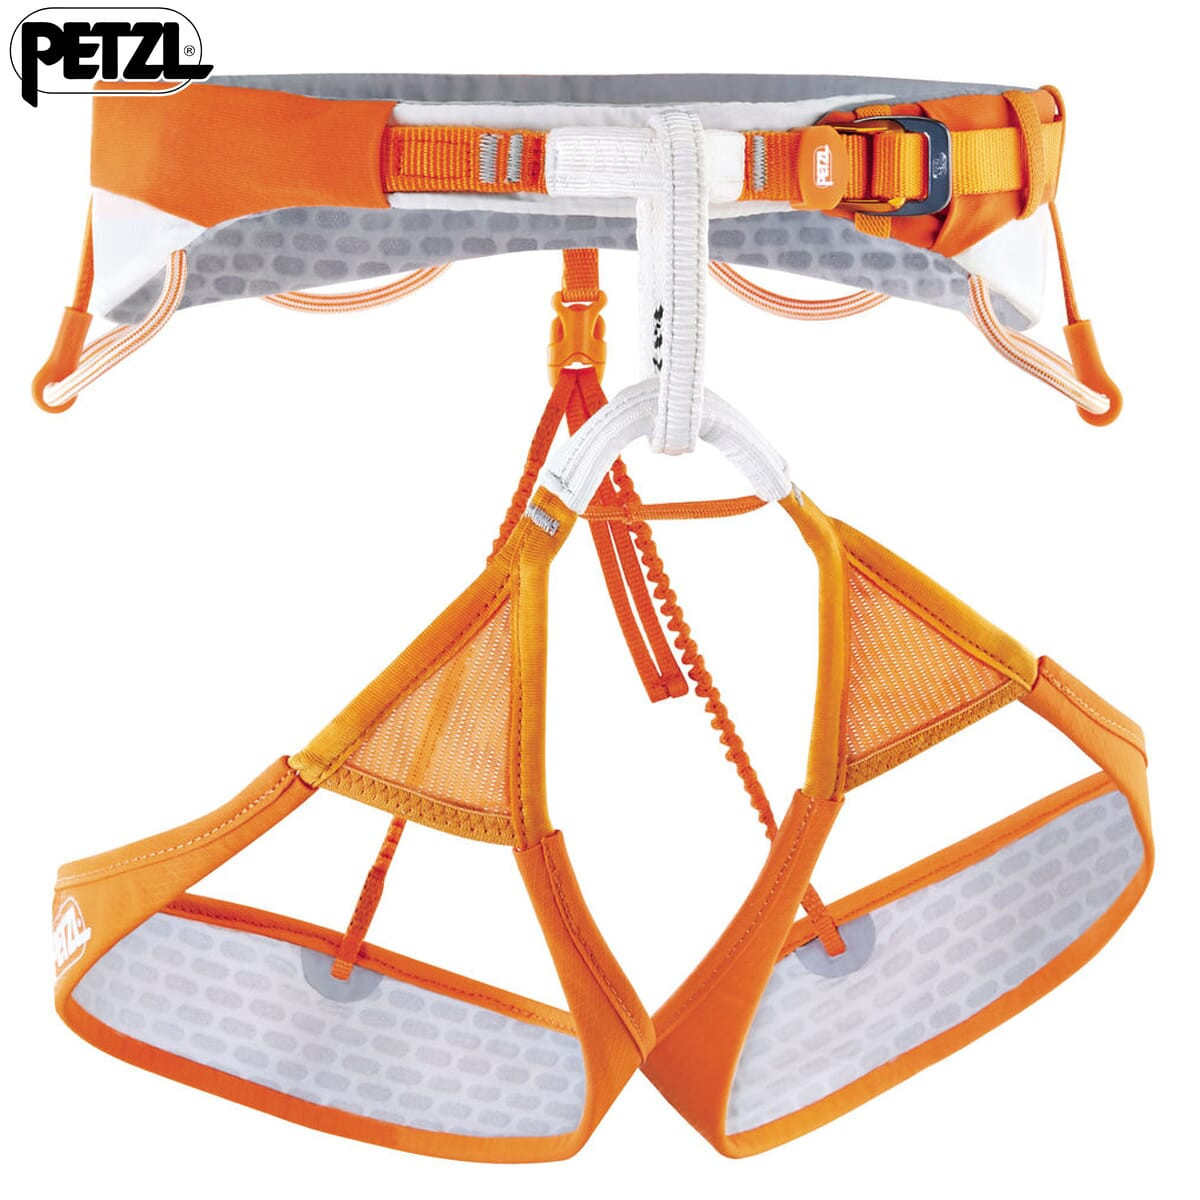 Petzl Sitta High End Climbing and Mountaineering Harness